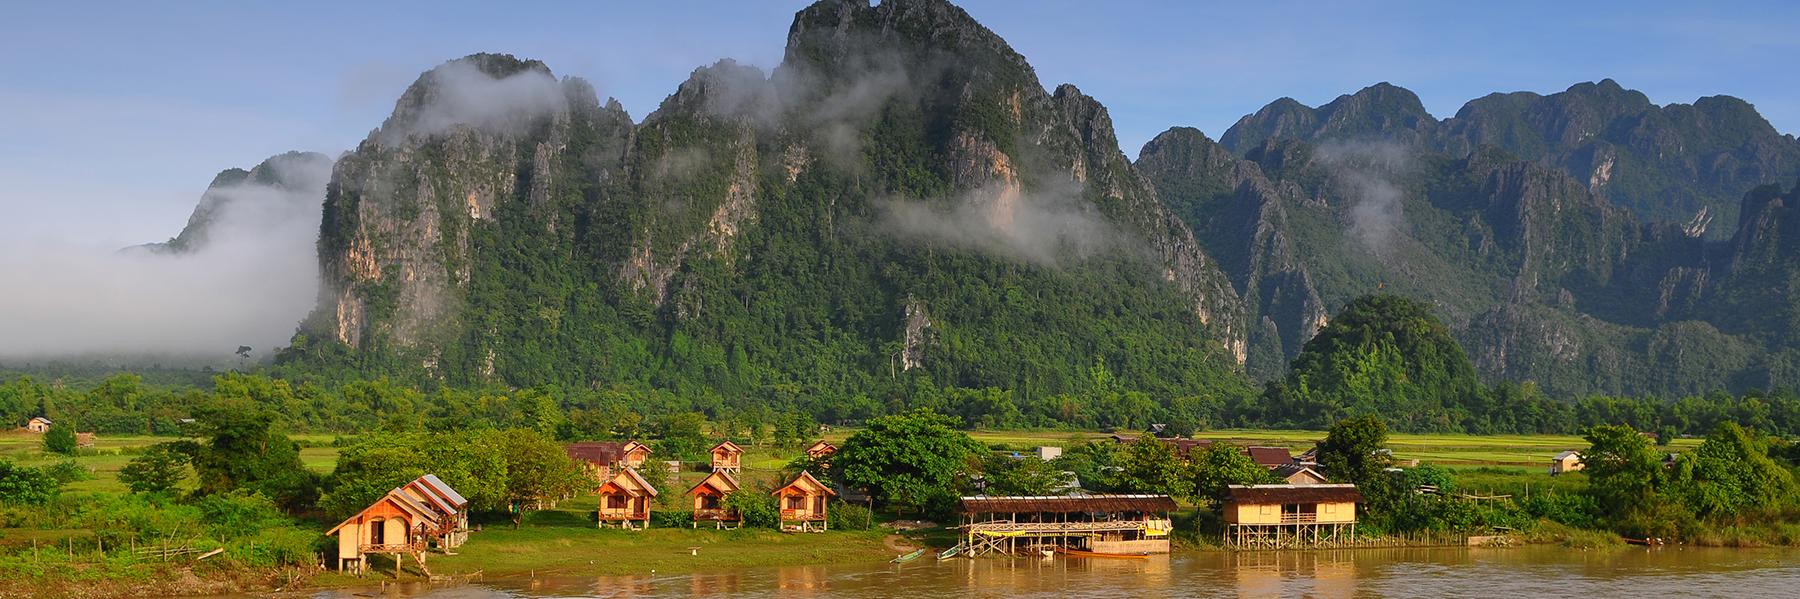 Mountains & Hill Tribes in Northern Laos